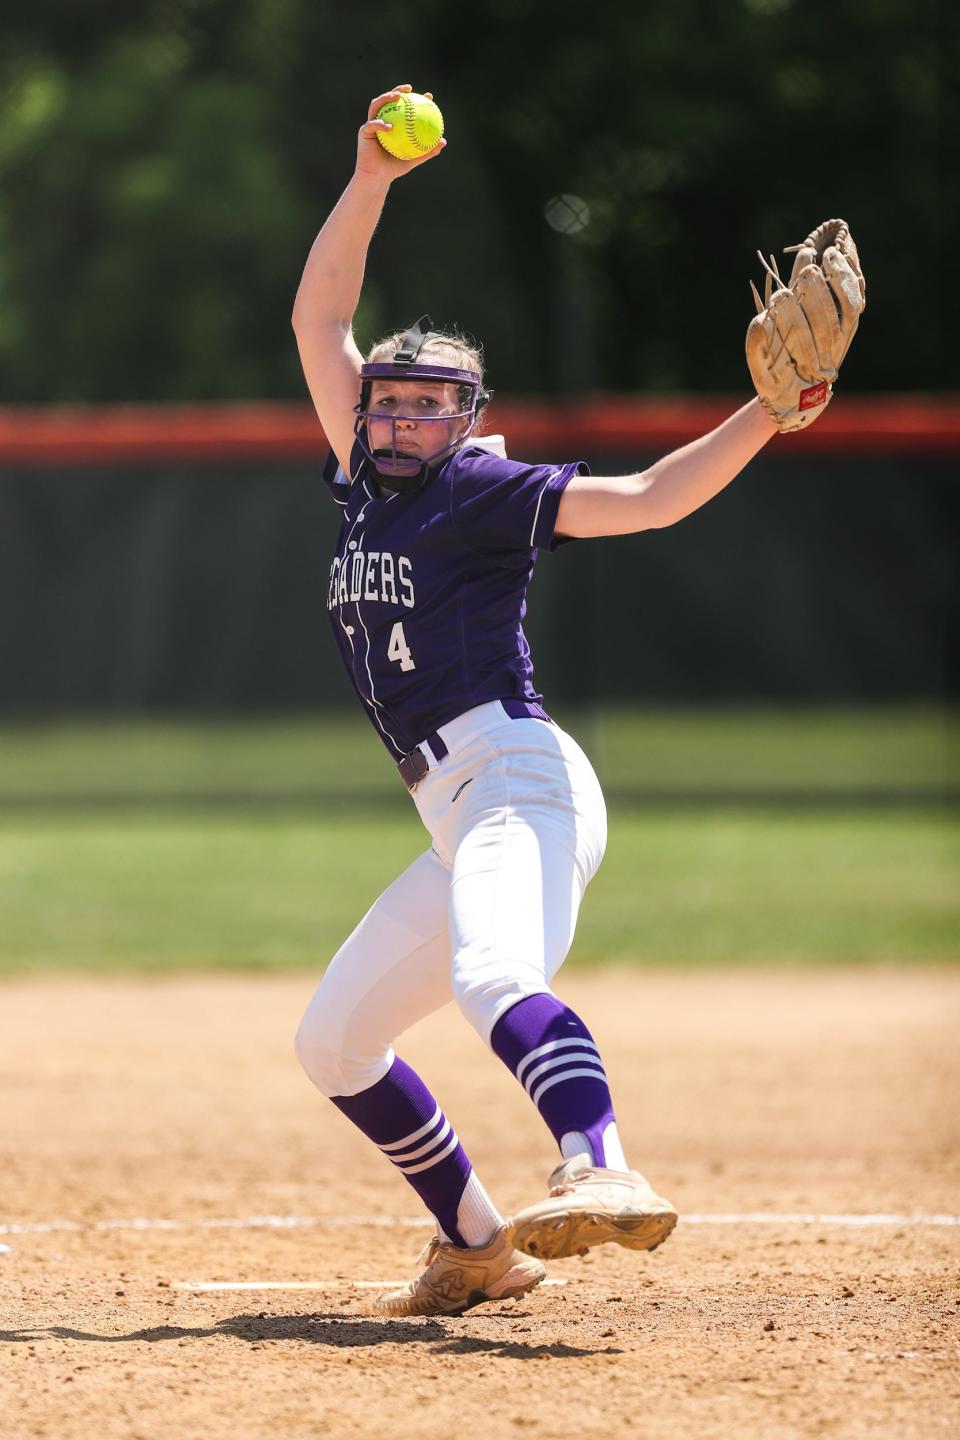 Valerie Pedersen from Monroe-Woodbury struck out 15 batters and allowed only two hits in a 13-2 victory over Corning in a NYSPHSAA Class AA softball regional semifinal May 30, 2023 at Union-Endicott.